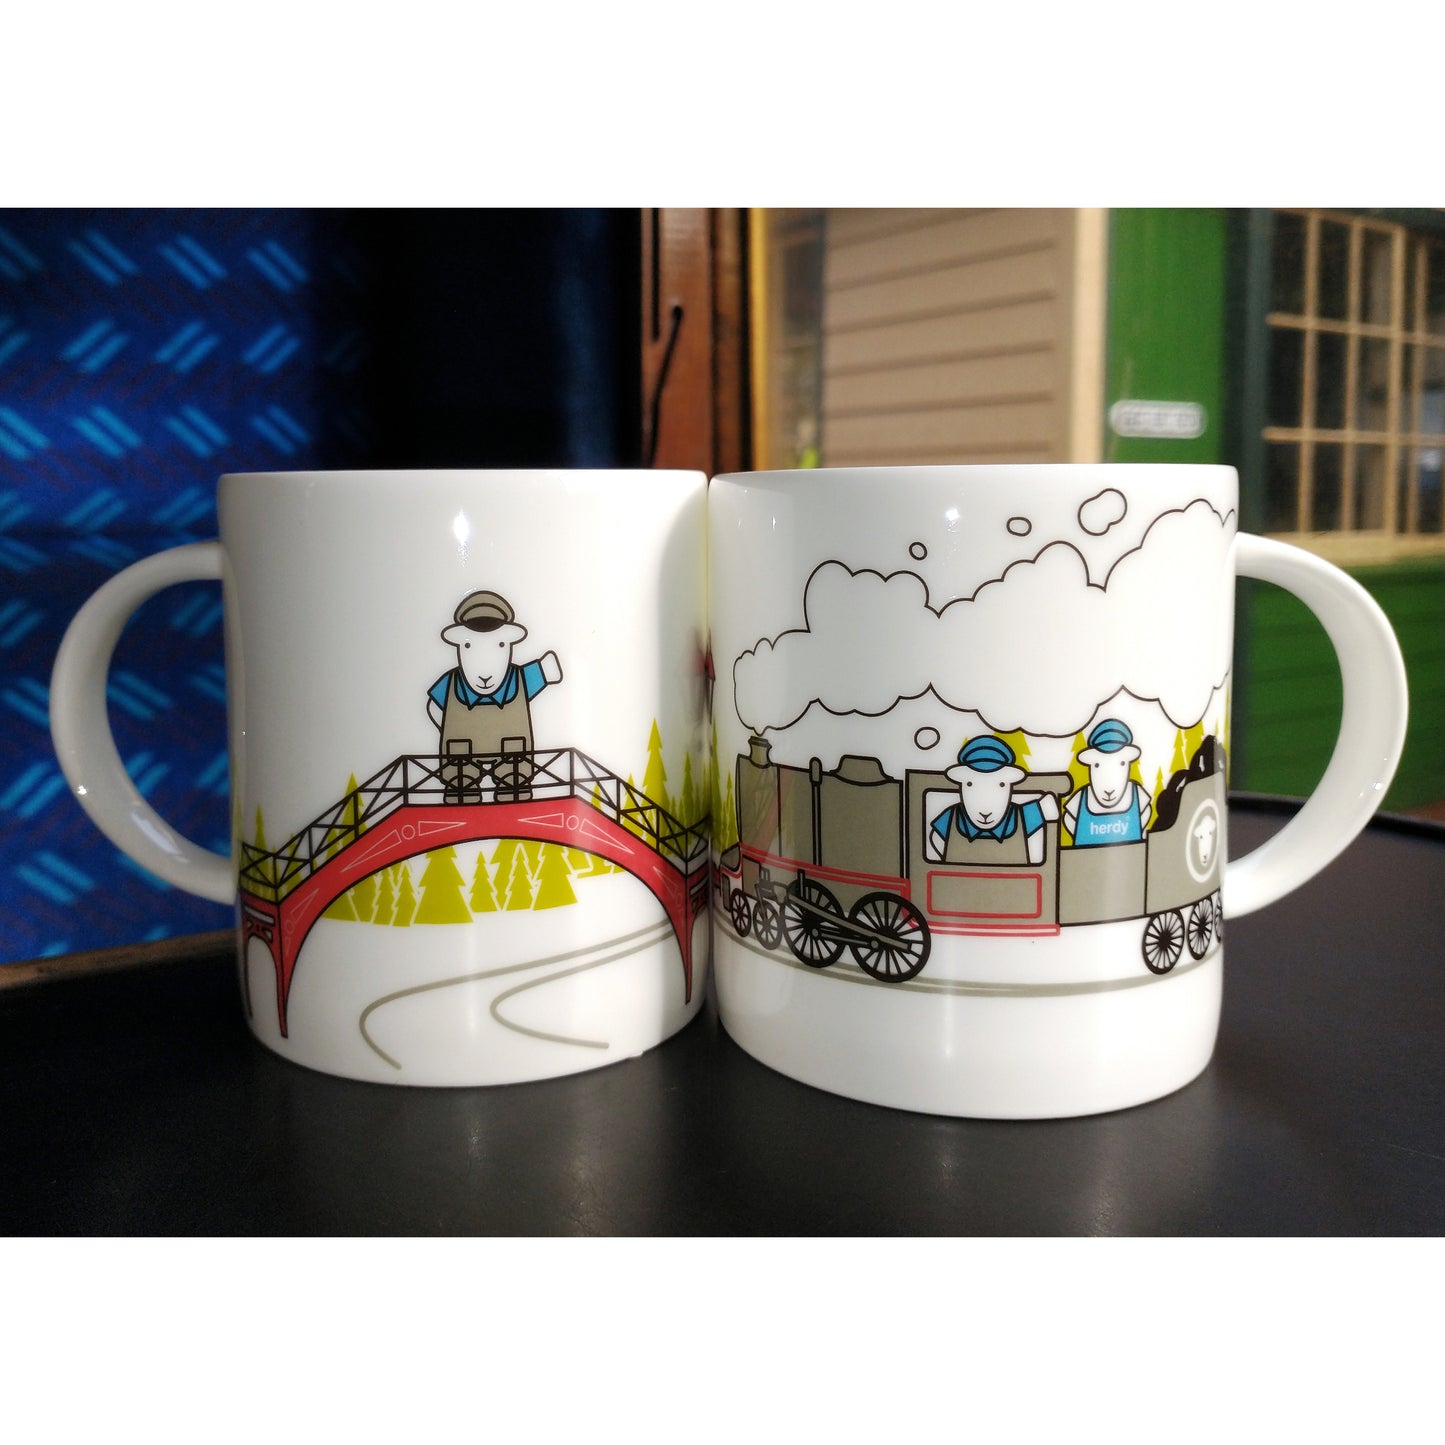 Two mugs together which show the full scene thay runs around the mug. Herdy the Sheep is waving from the top of the red footbridge and there are two Herdies on the locomotive.